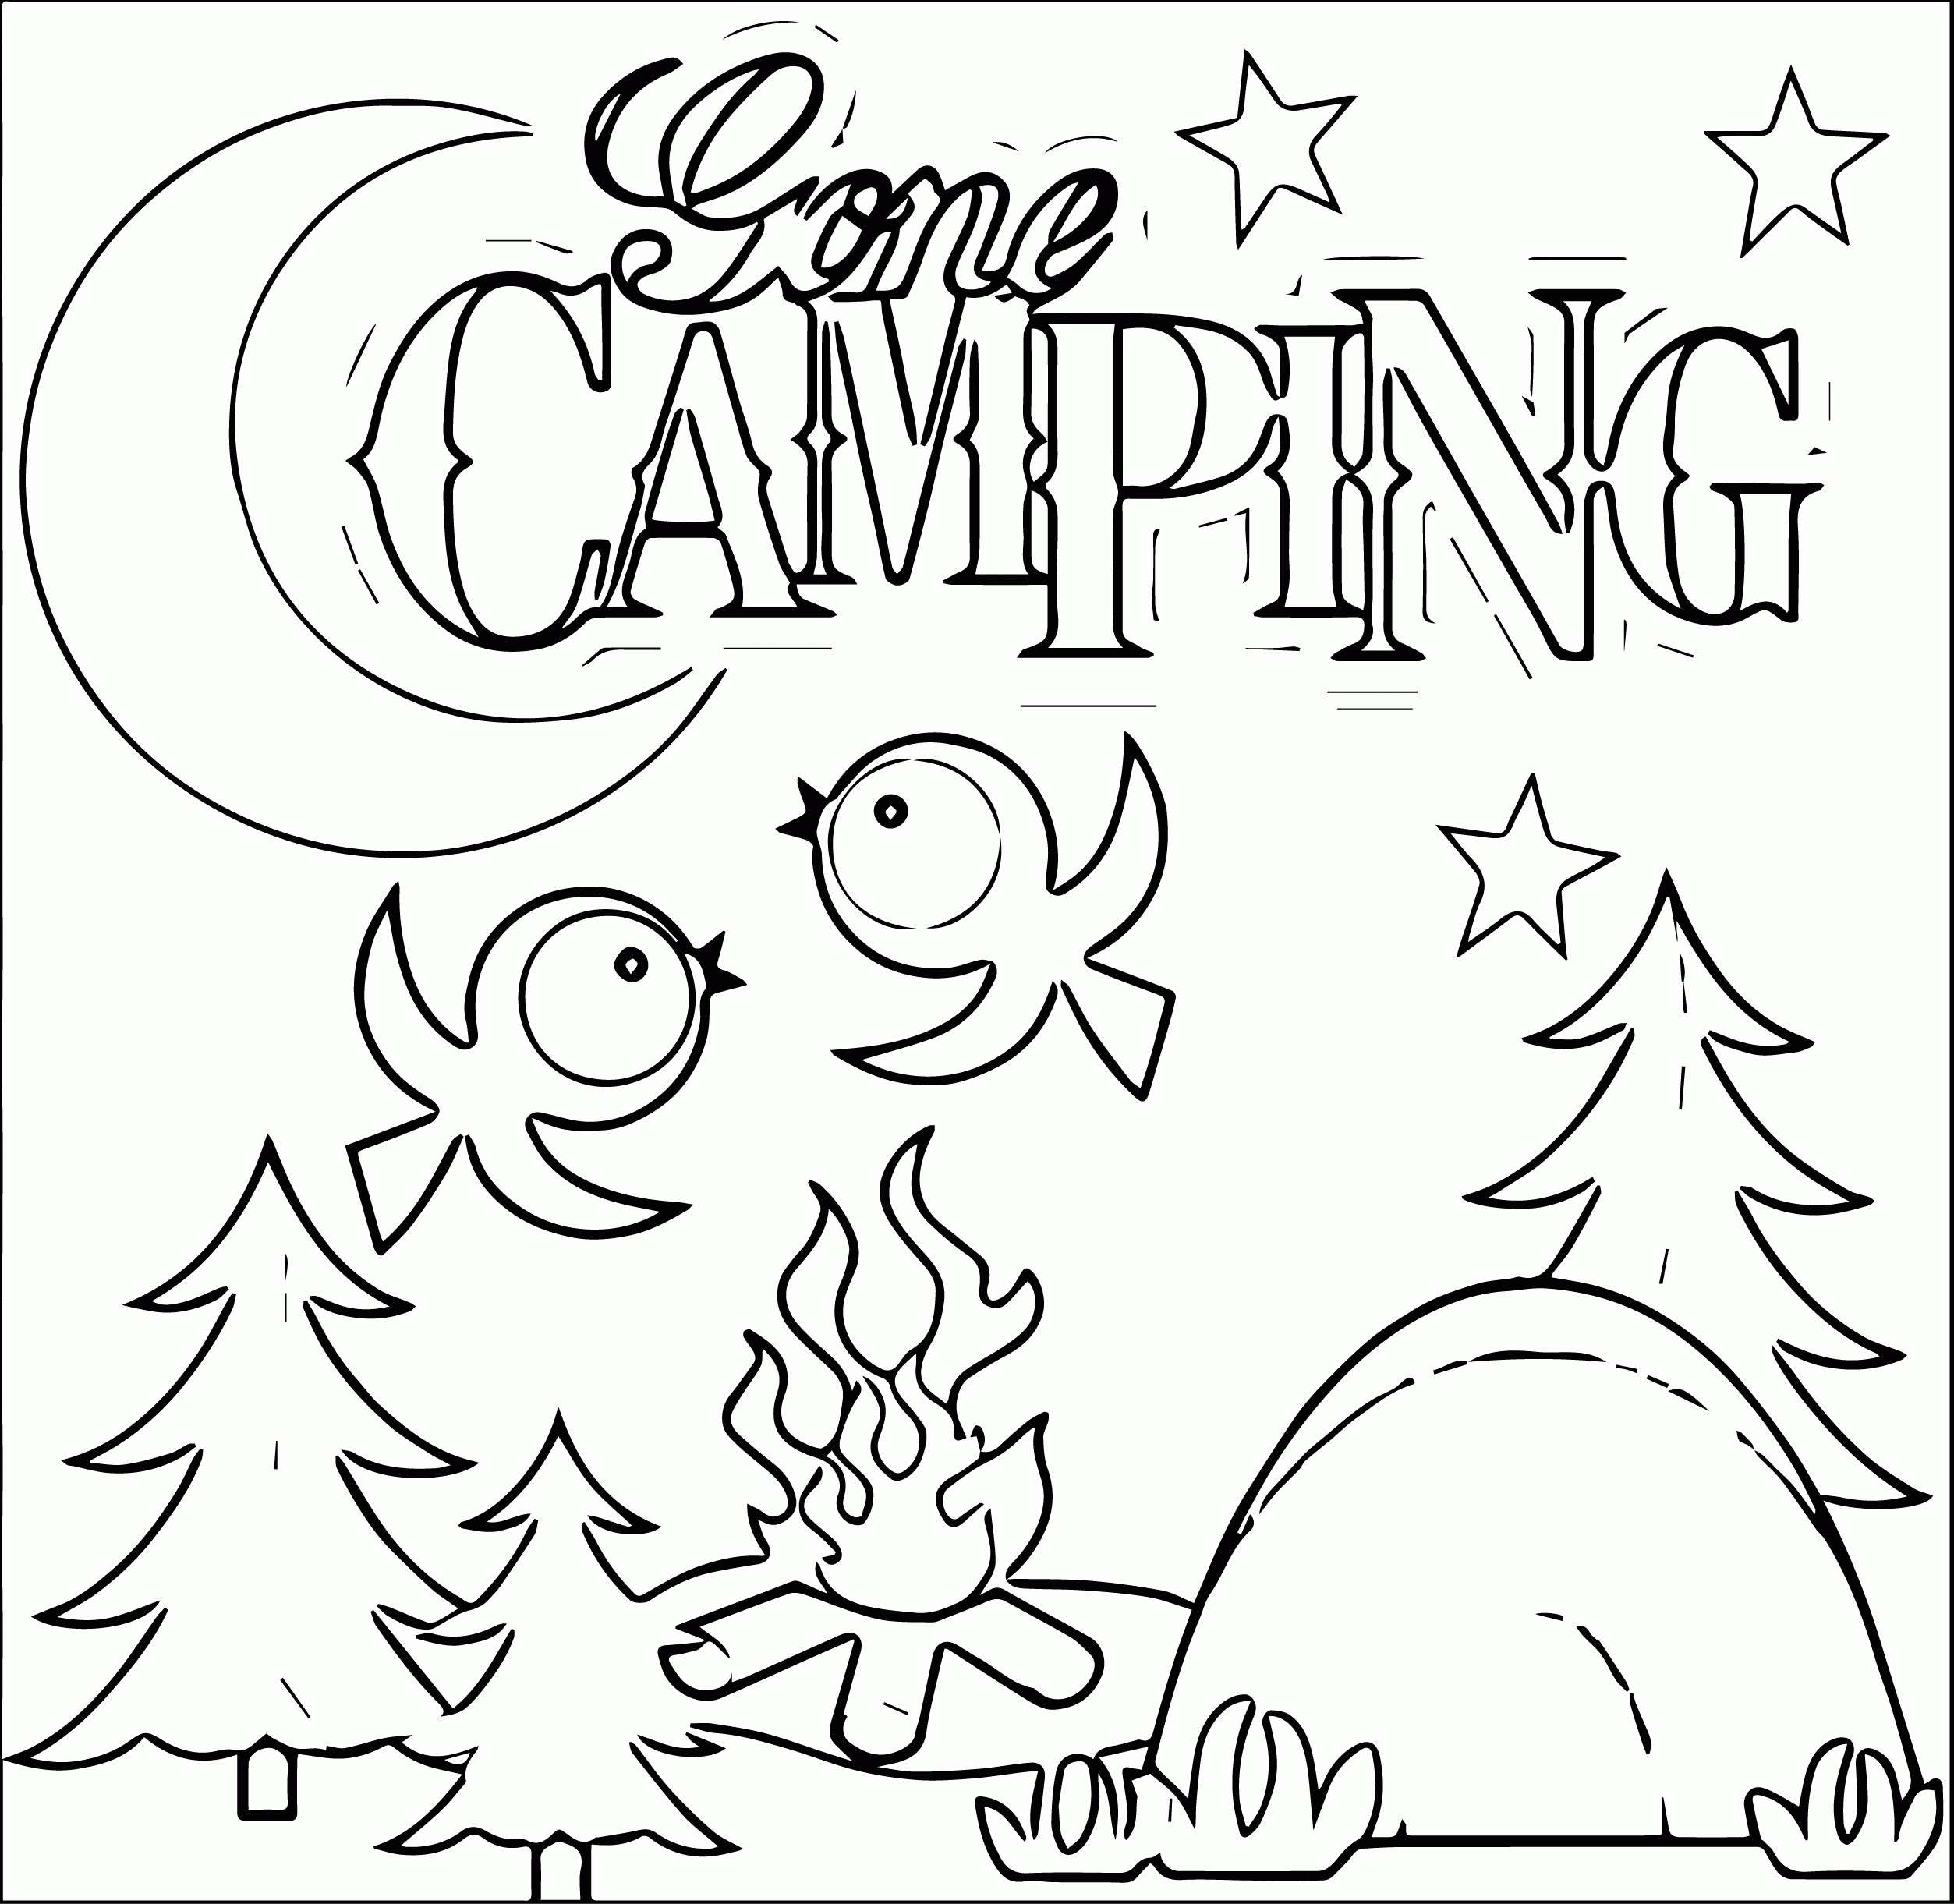 Free Printable Camping Coloring Pages
 Camping Coloring Pages Best Coloring Pages For Kids